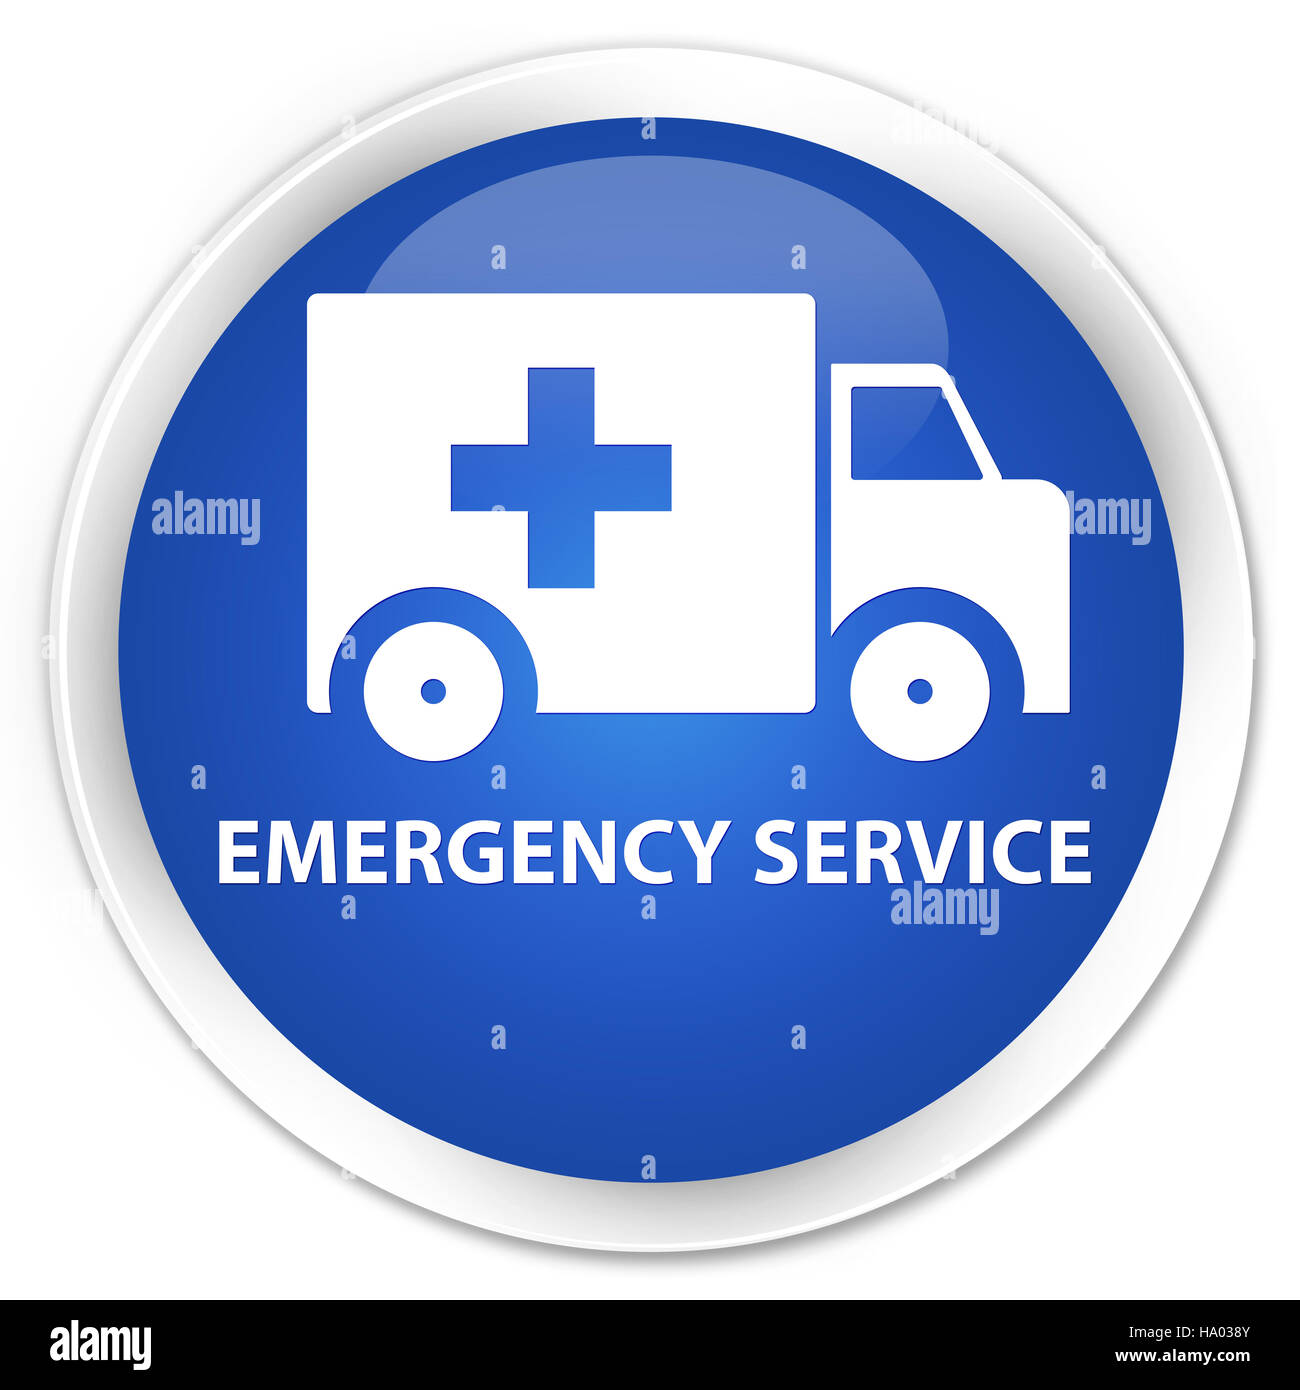 Emergency service isolated on premium blue round button abstract illustration Stock Photo